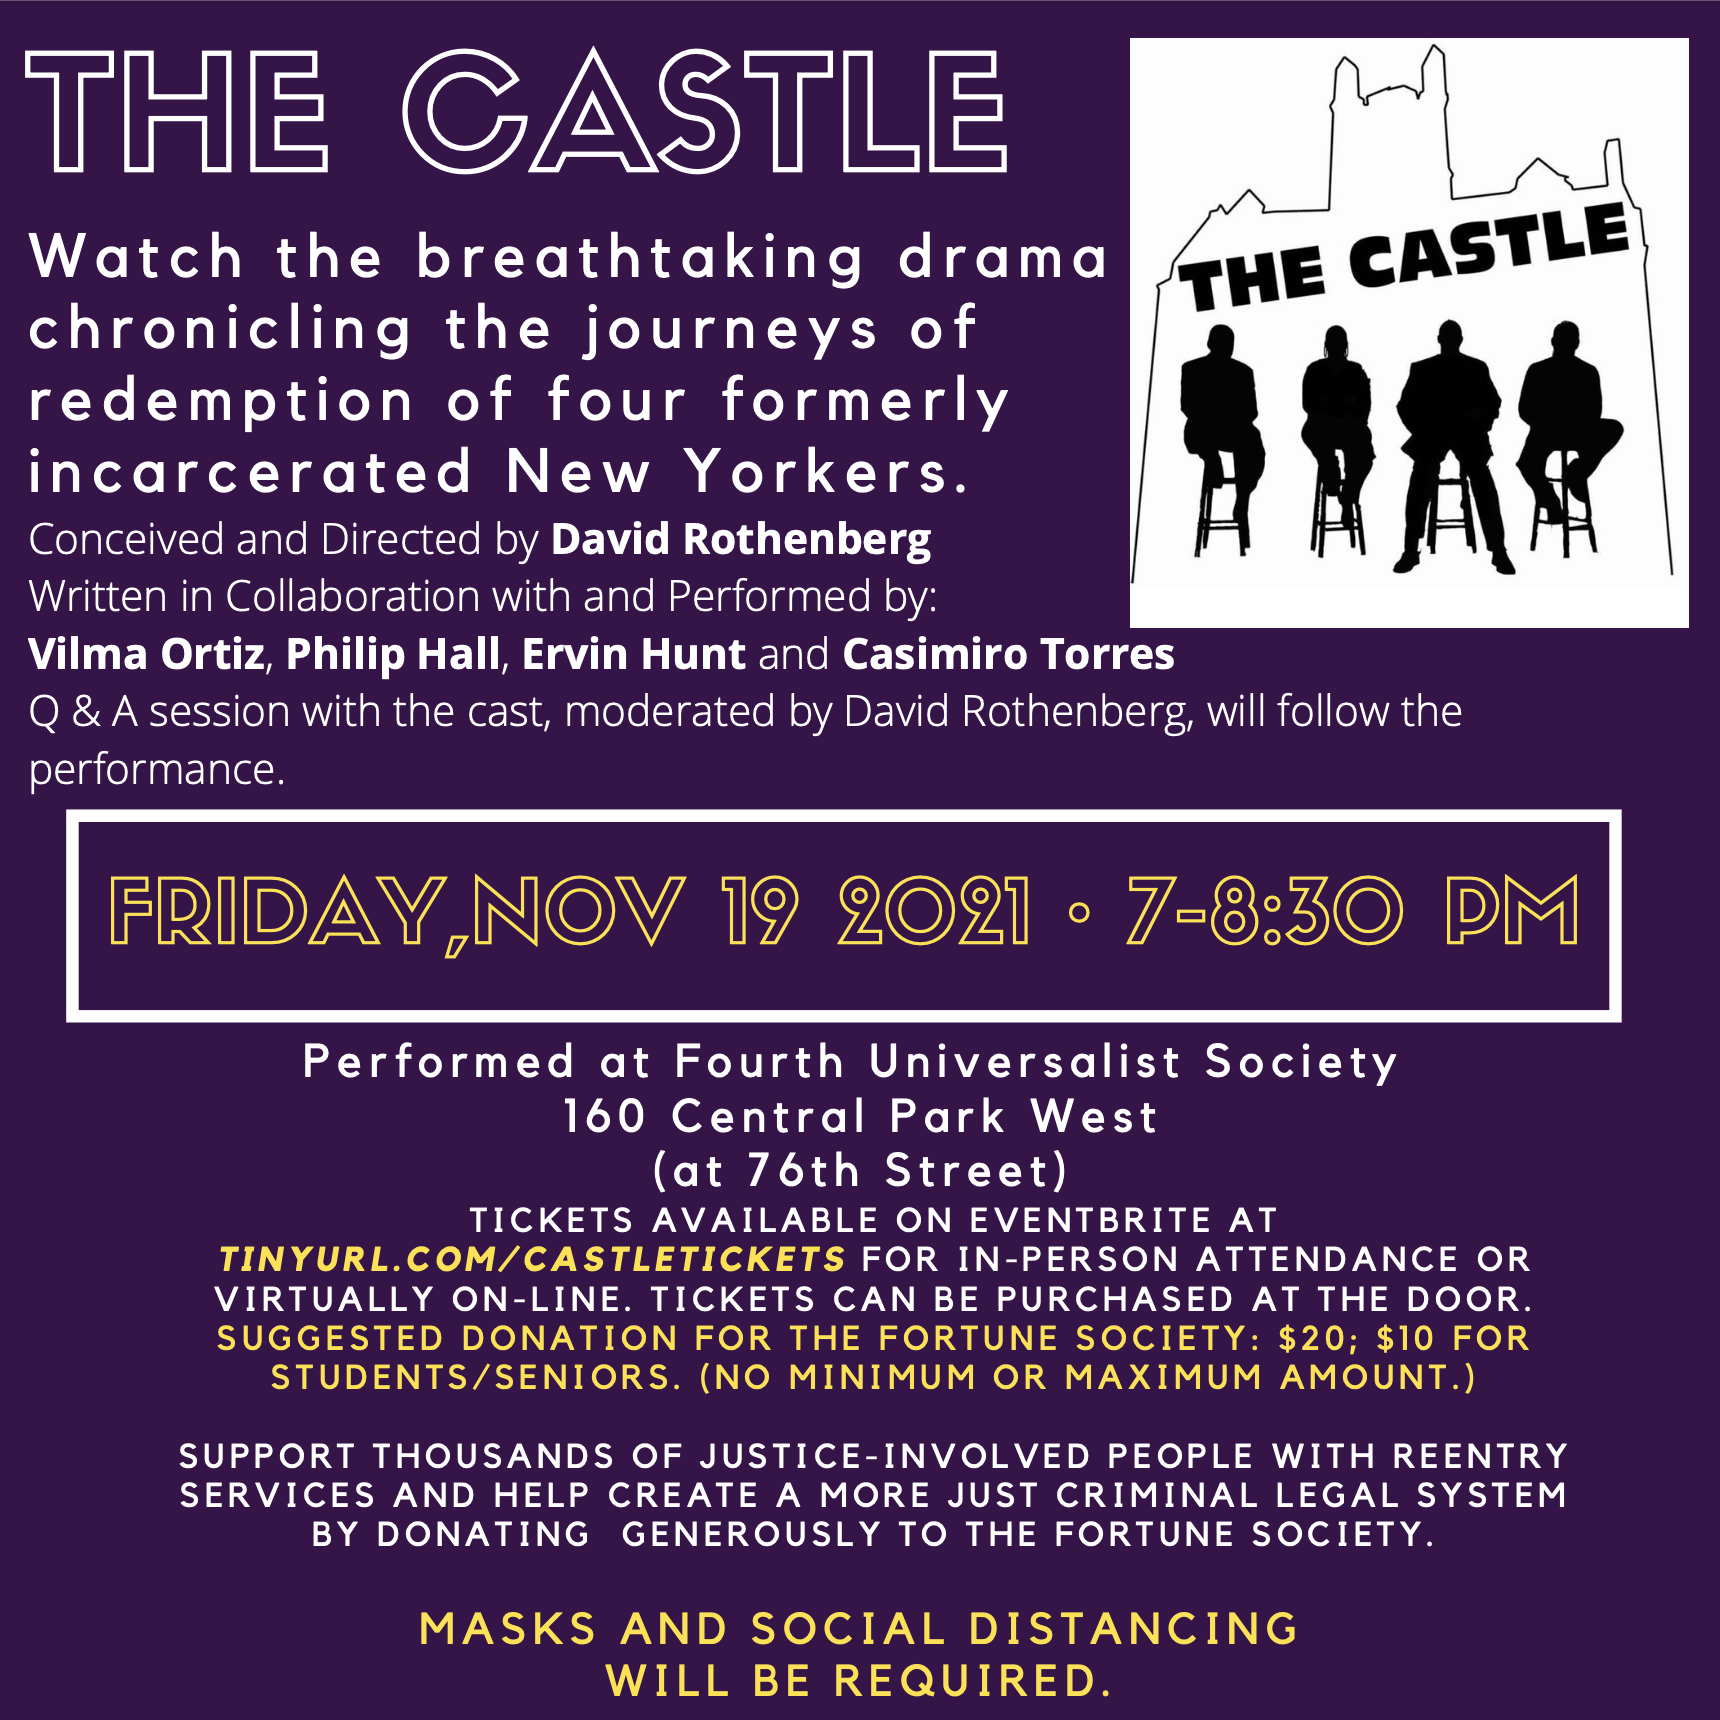 “The Castle” Performance at Fourth Universalist Society